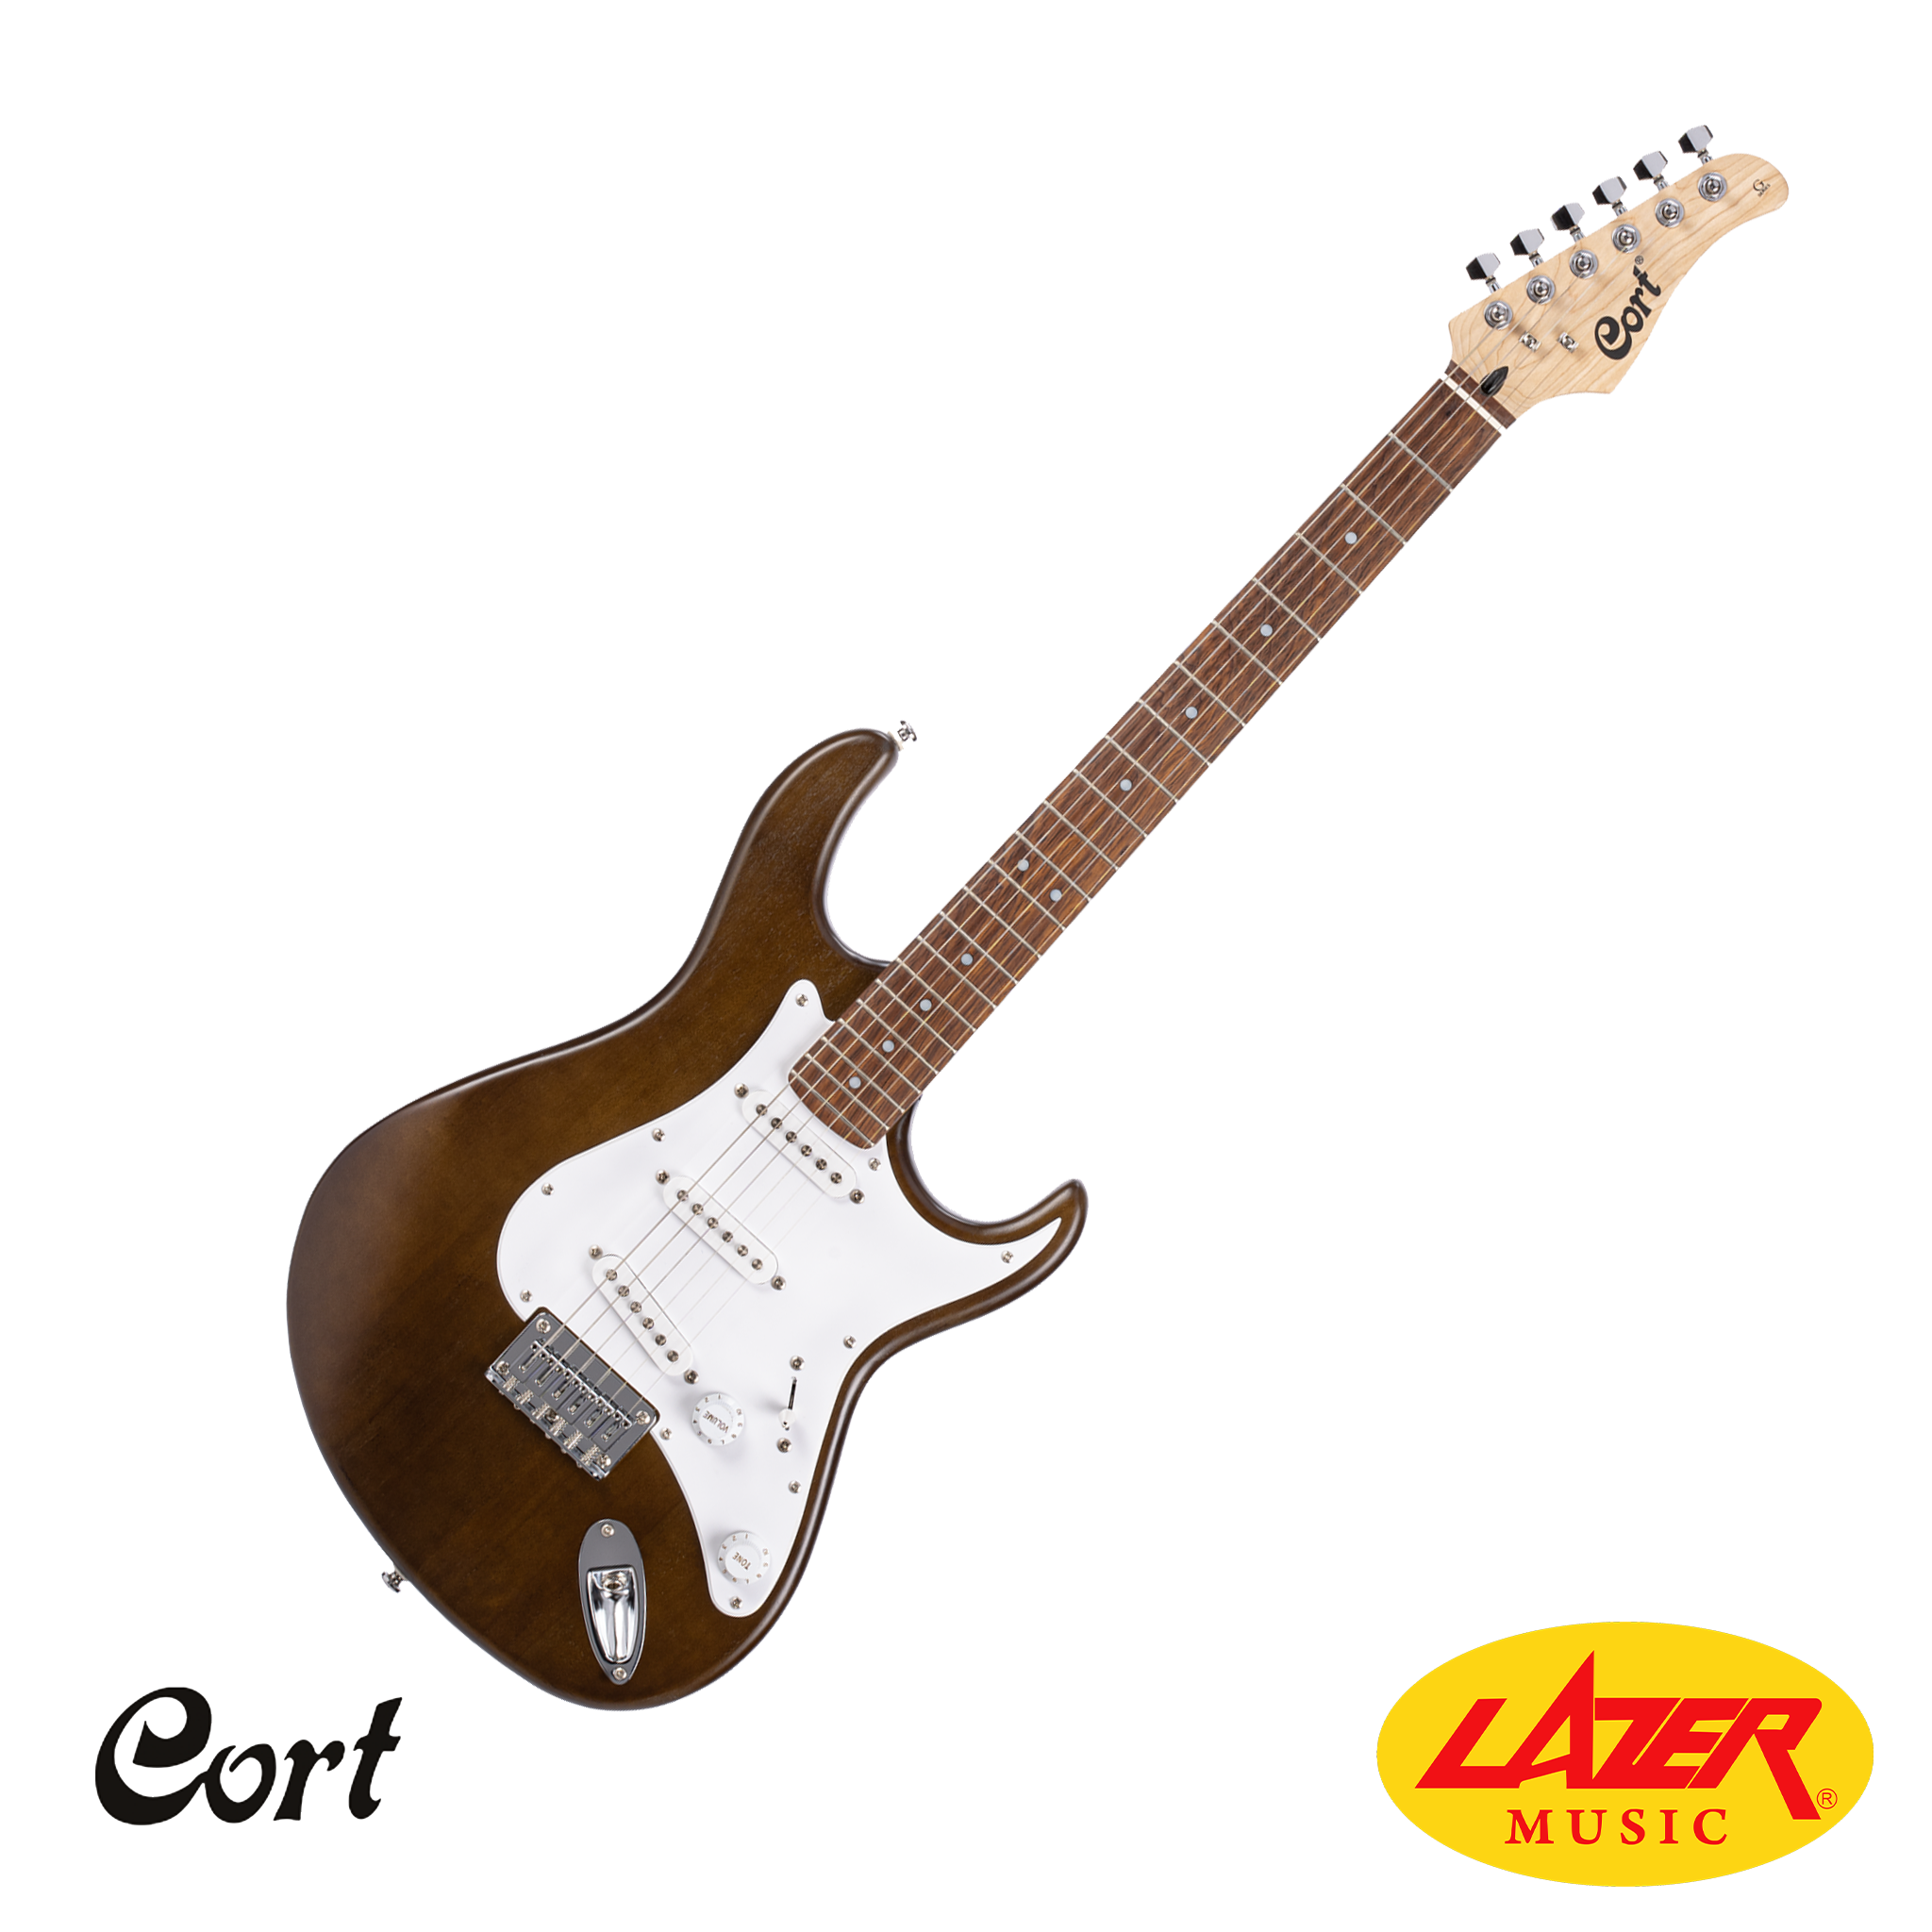 Cort G100 Double Cut Away Electric Guitar with Bag